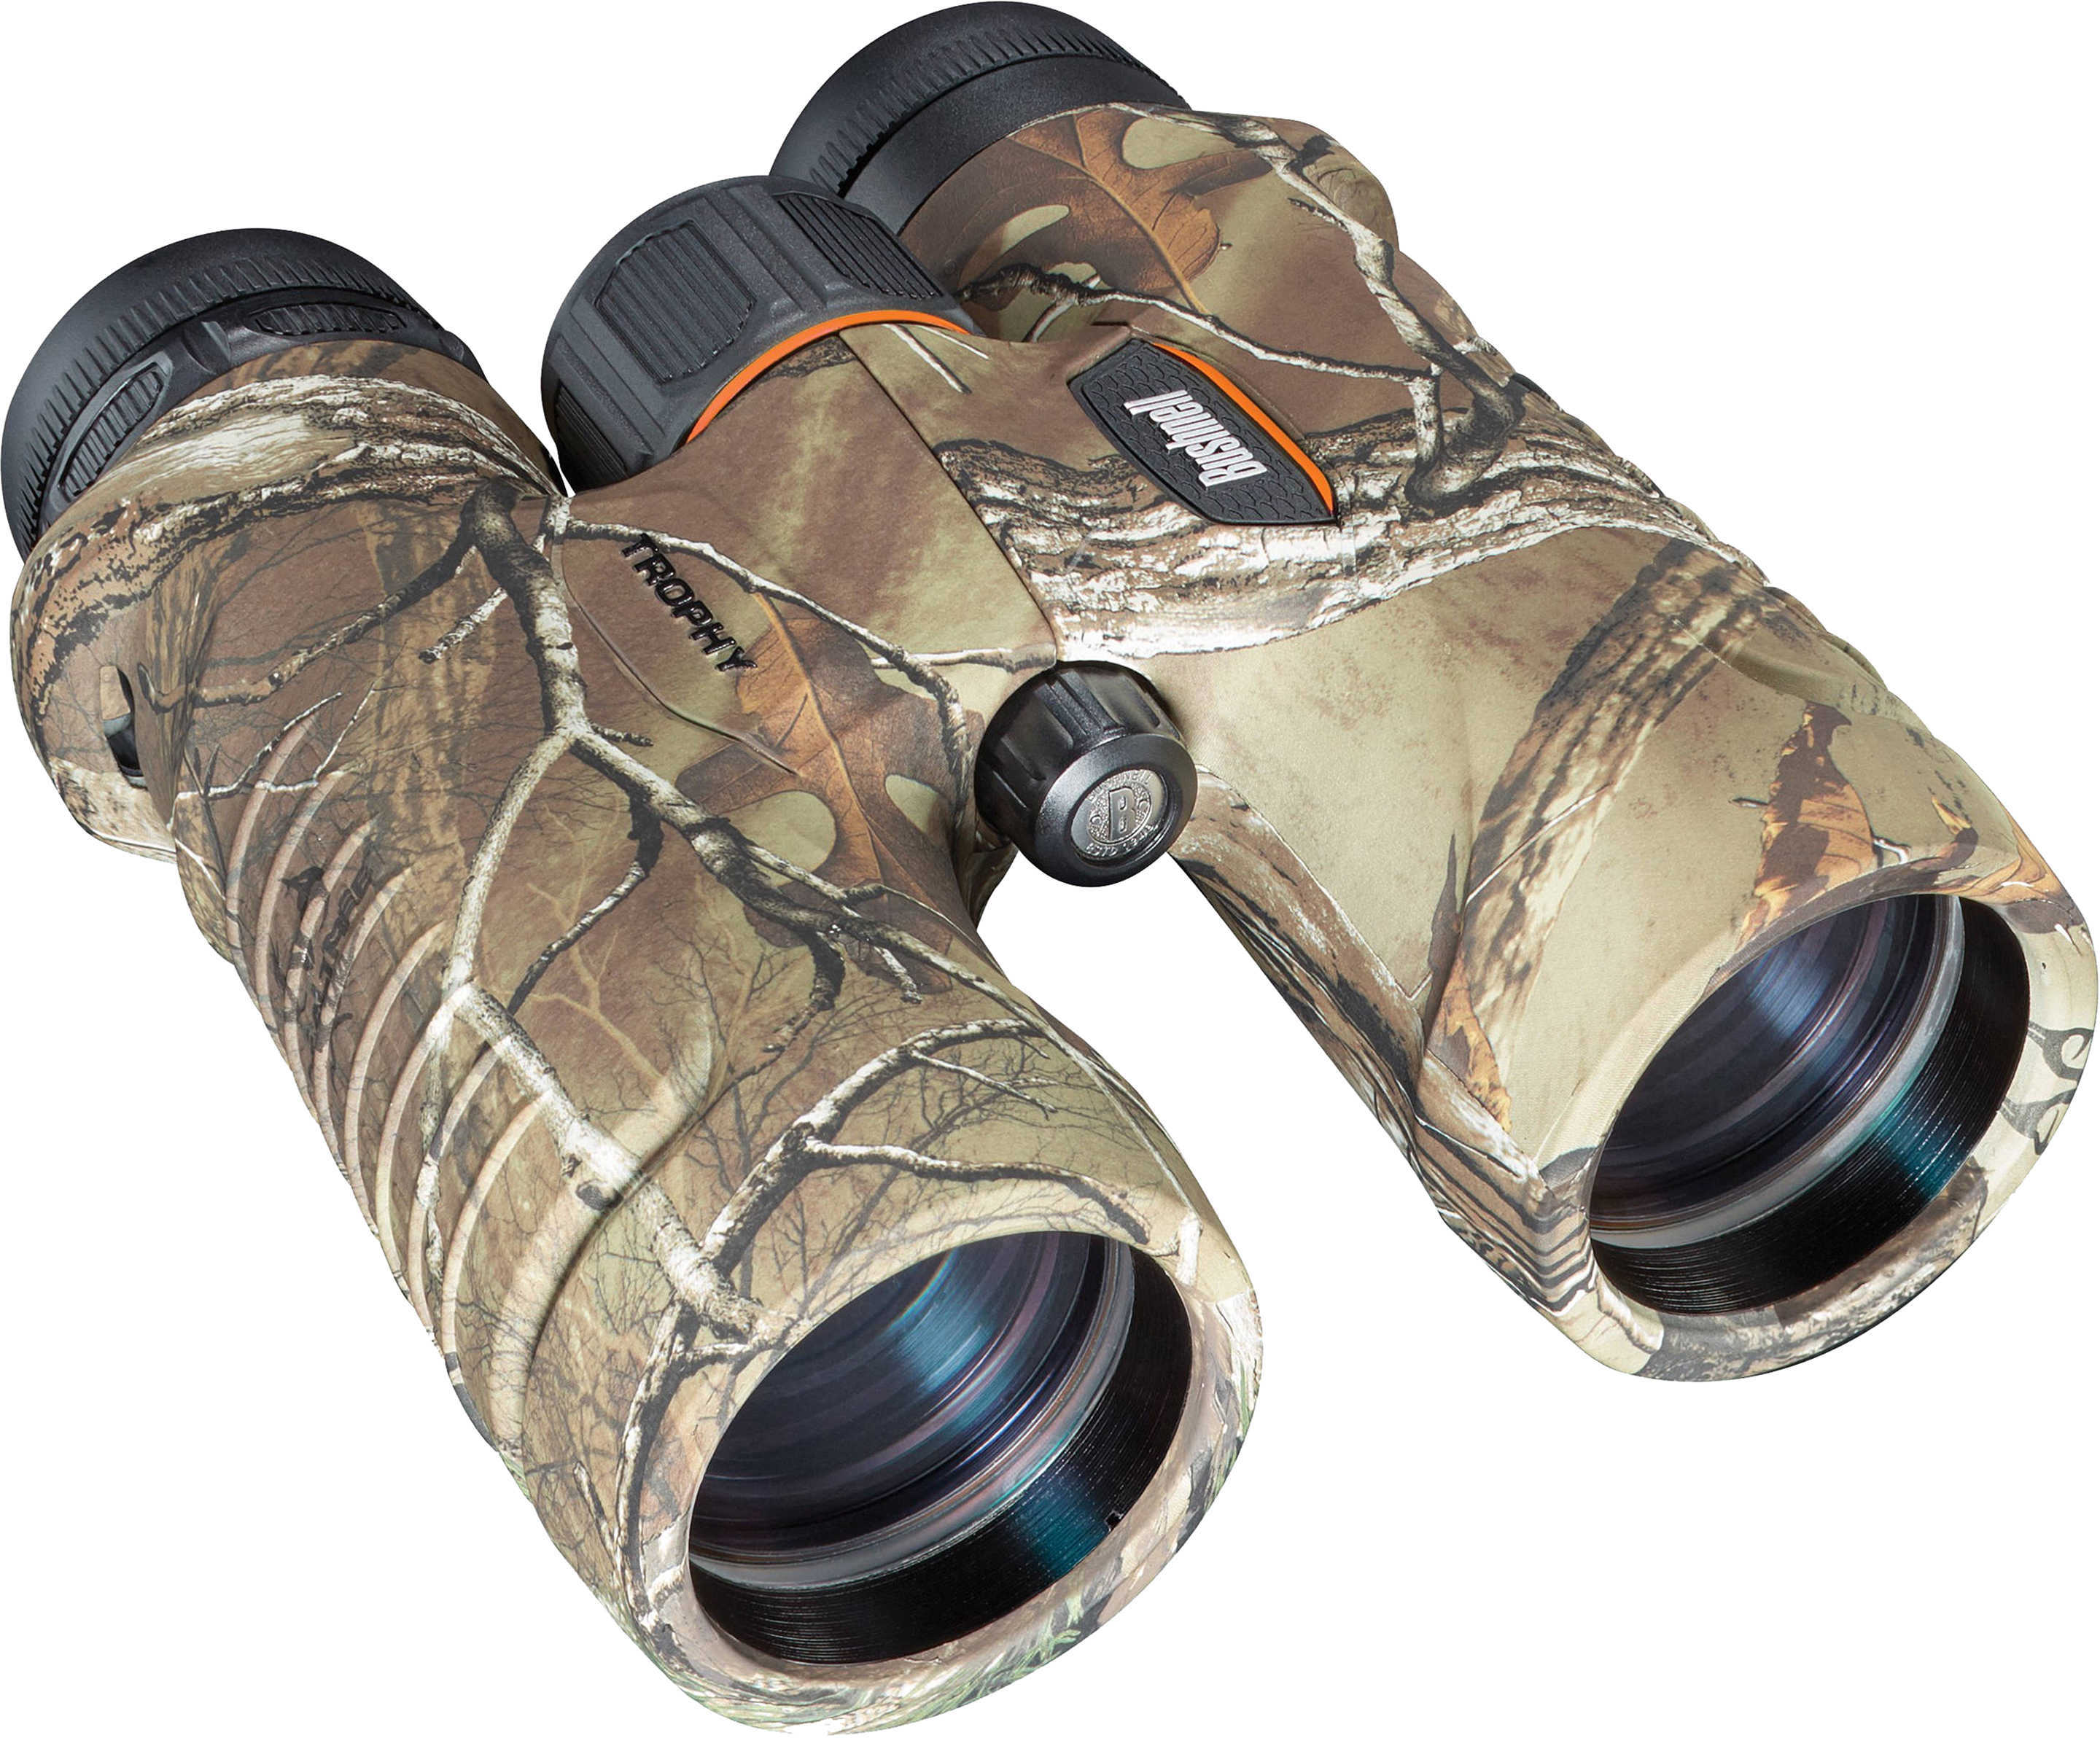 Bushnell 334211 Trophy 10x 42mm 330 ft @ 1000 yds FOV 15.2mm Eye Relief Realtree Xtra Green